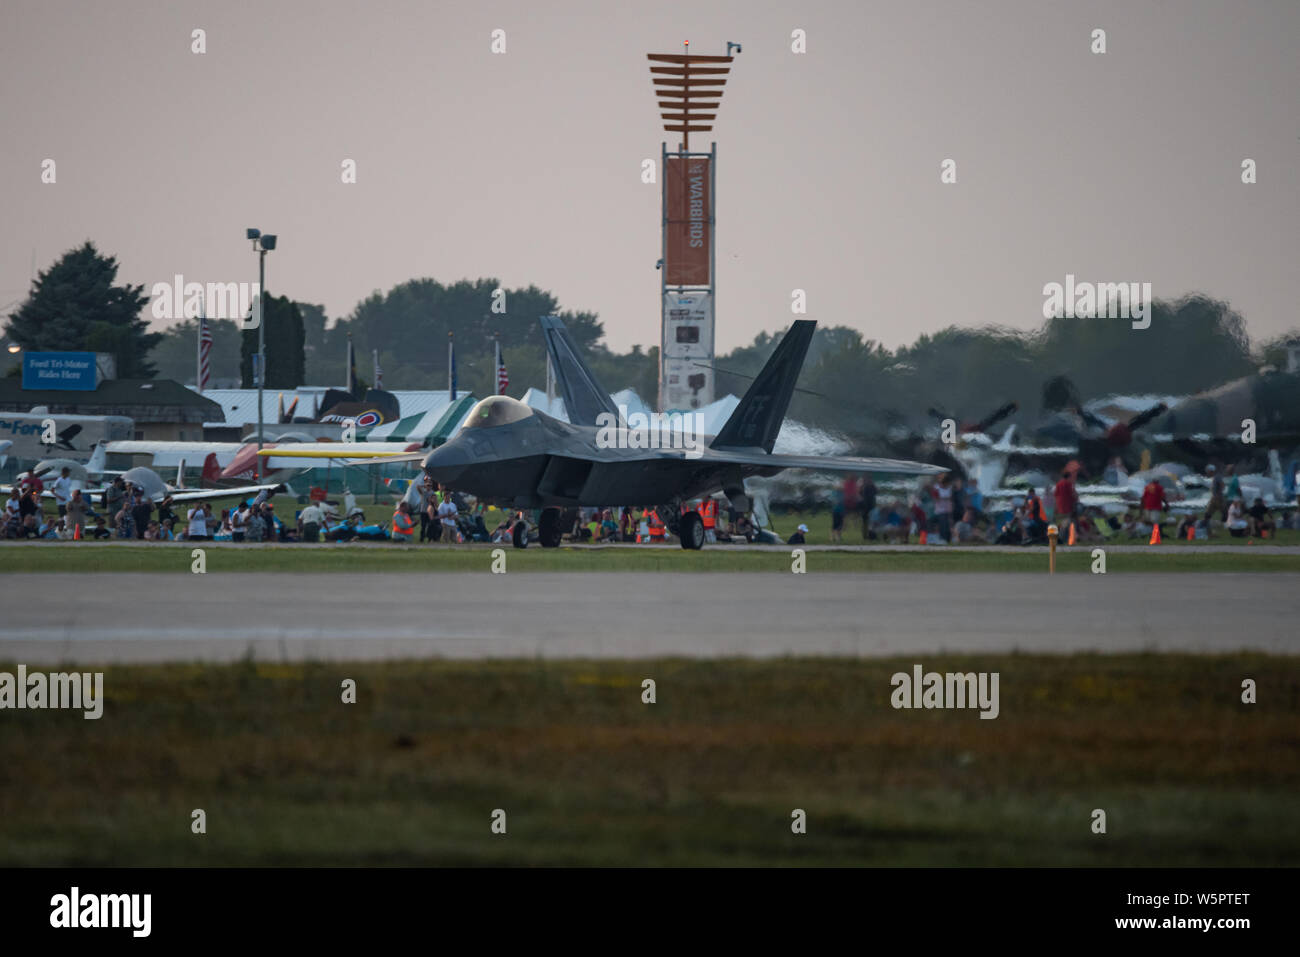 U.S. Air Force Maj. Paul Lopez, F-22 Demo Team commander, lands the Raptor after performing a twilight demonstration at EAA AirVenture in Oshkosh, Wis., July 28, 2019. With over 500,000 spectators in attendance and 10,000 aircraft on display, Oshkosh holds the title at the largest air show in the world. (U.S. Air Force photo by 2nd Lt. Samuel Eckholm) Stock Photo